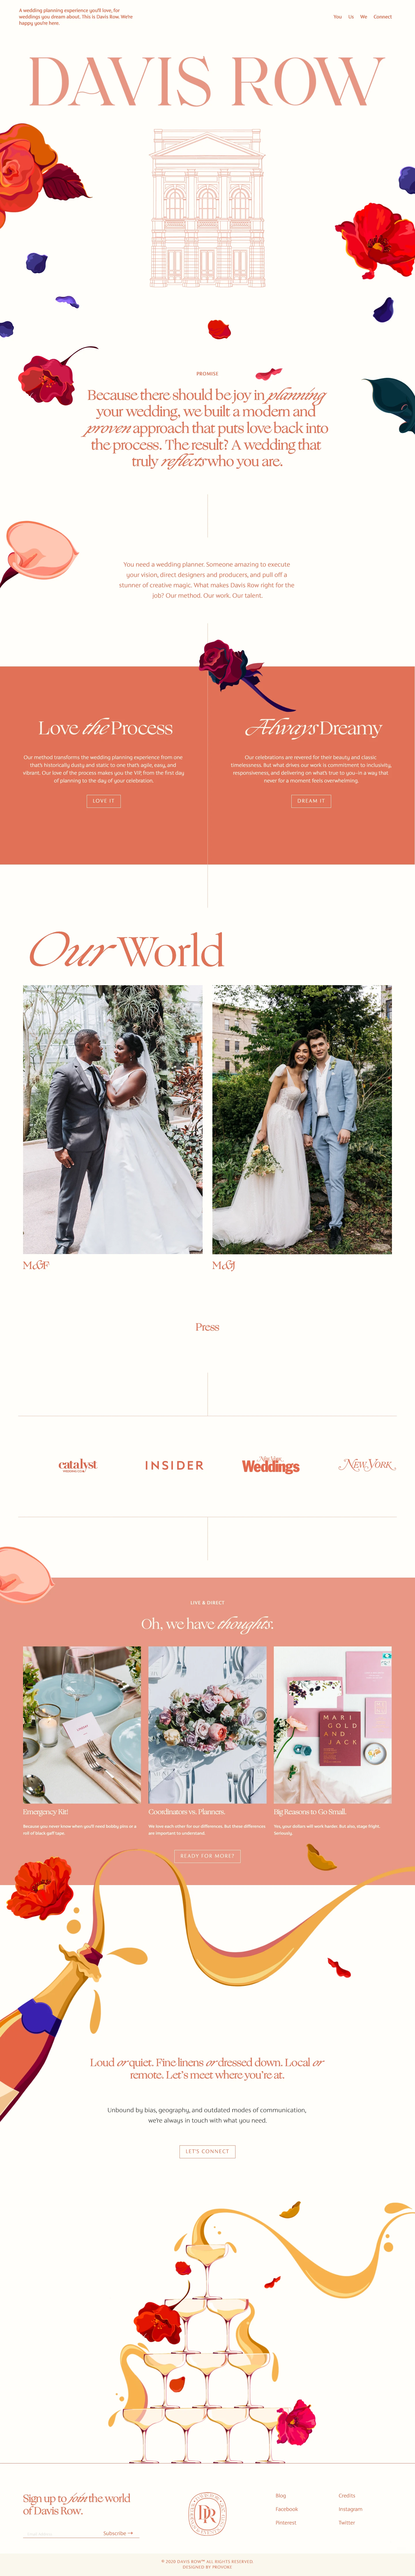 Davis Row Landing Page Example: A wedding planning experience you’ll love, for weddings you dream about.